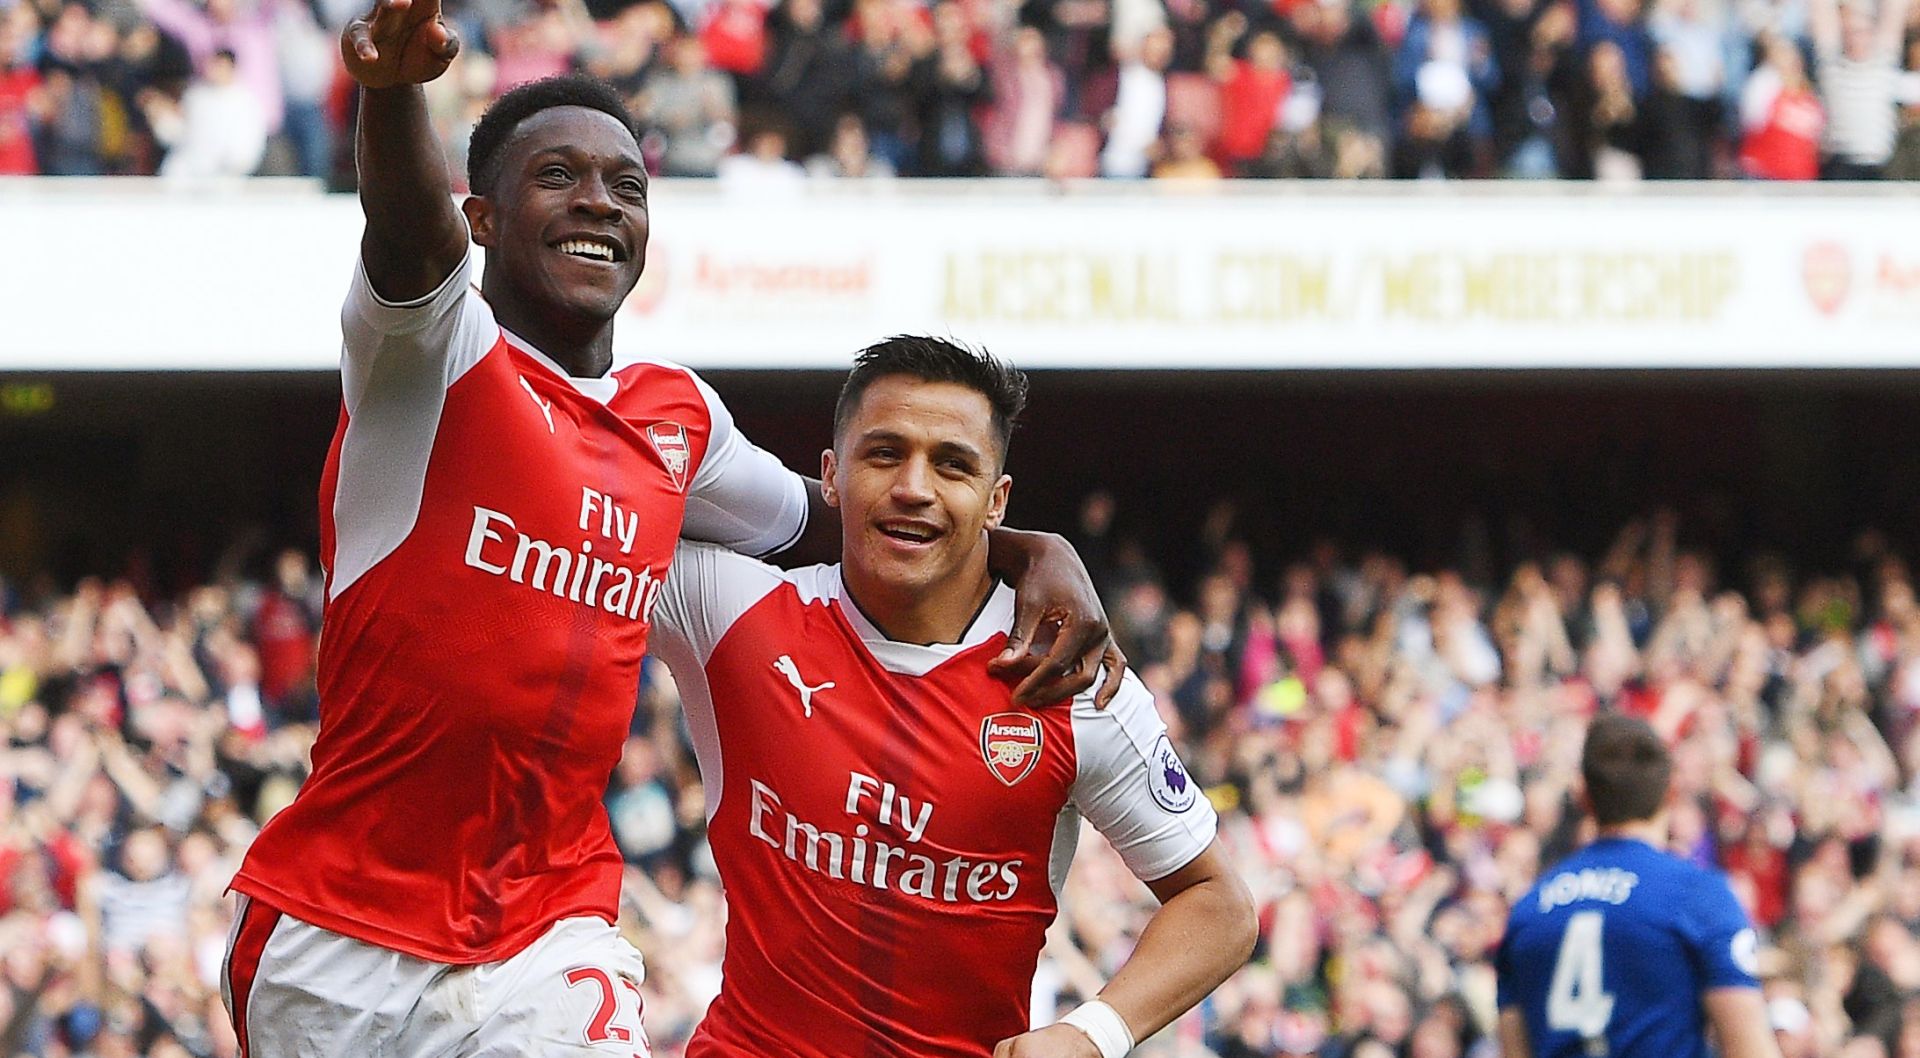 epa05948855 Arsenal's Danny Welbeck (L) celebrates with his teammate Alexis Sanchez (R) after scoring the 2-0 lead during the English Premier League soccer match between Arsenal FC and Manchester United in London, Britain, 07 May 2017.  EPA/FACUNDO ARRIZABALAGA EDITORIAL USE ONLY. No use with unauthorized audio, video, data, fixture lists, club/league logos or 'live' services. Online in-match use limited to 75 images, no video emulation. No use in betting, games or single club/league/player publications.